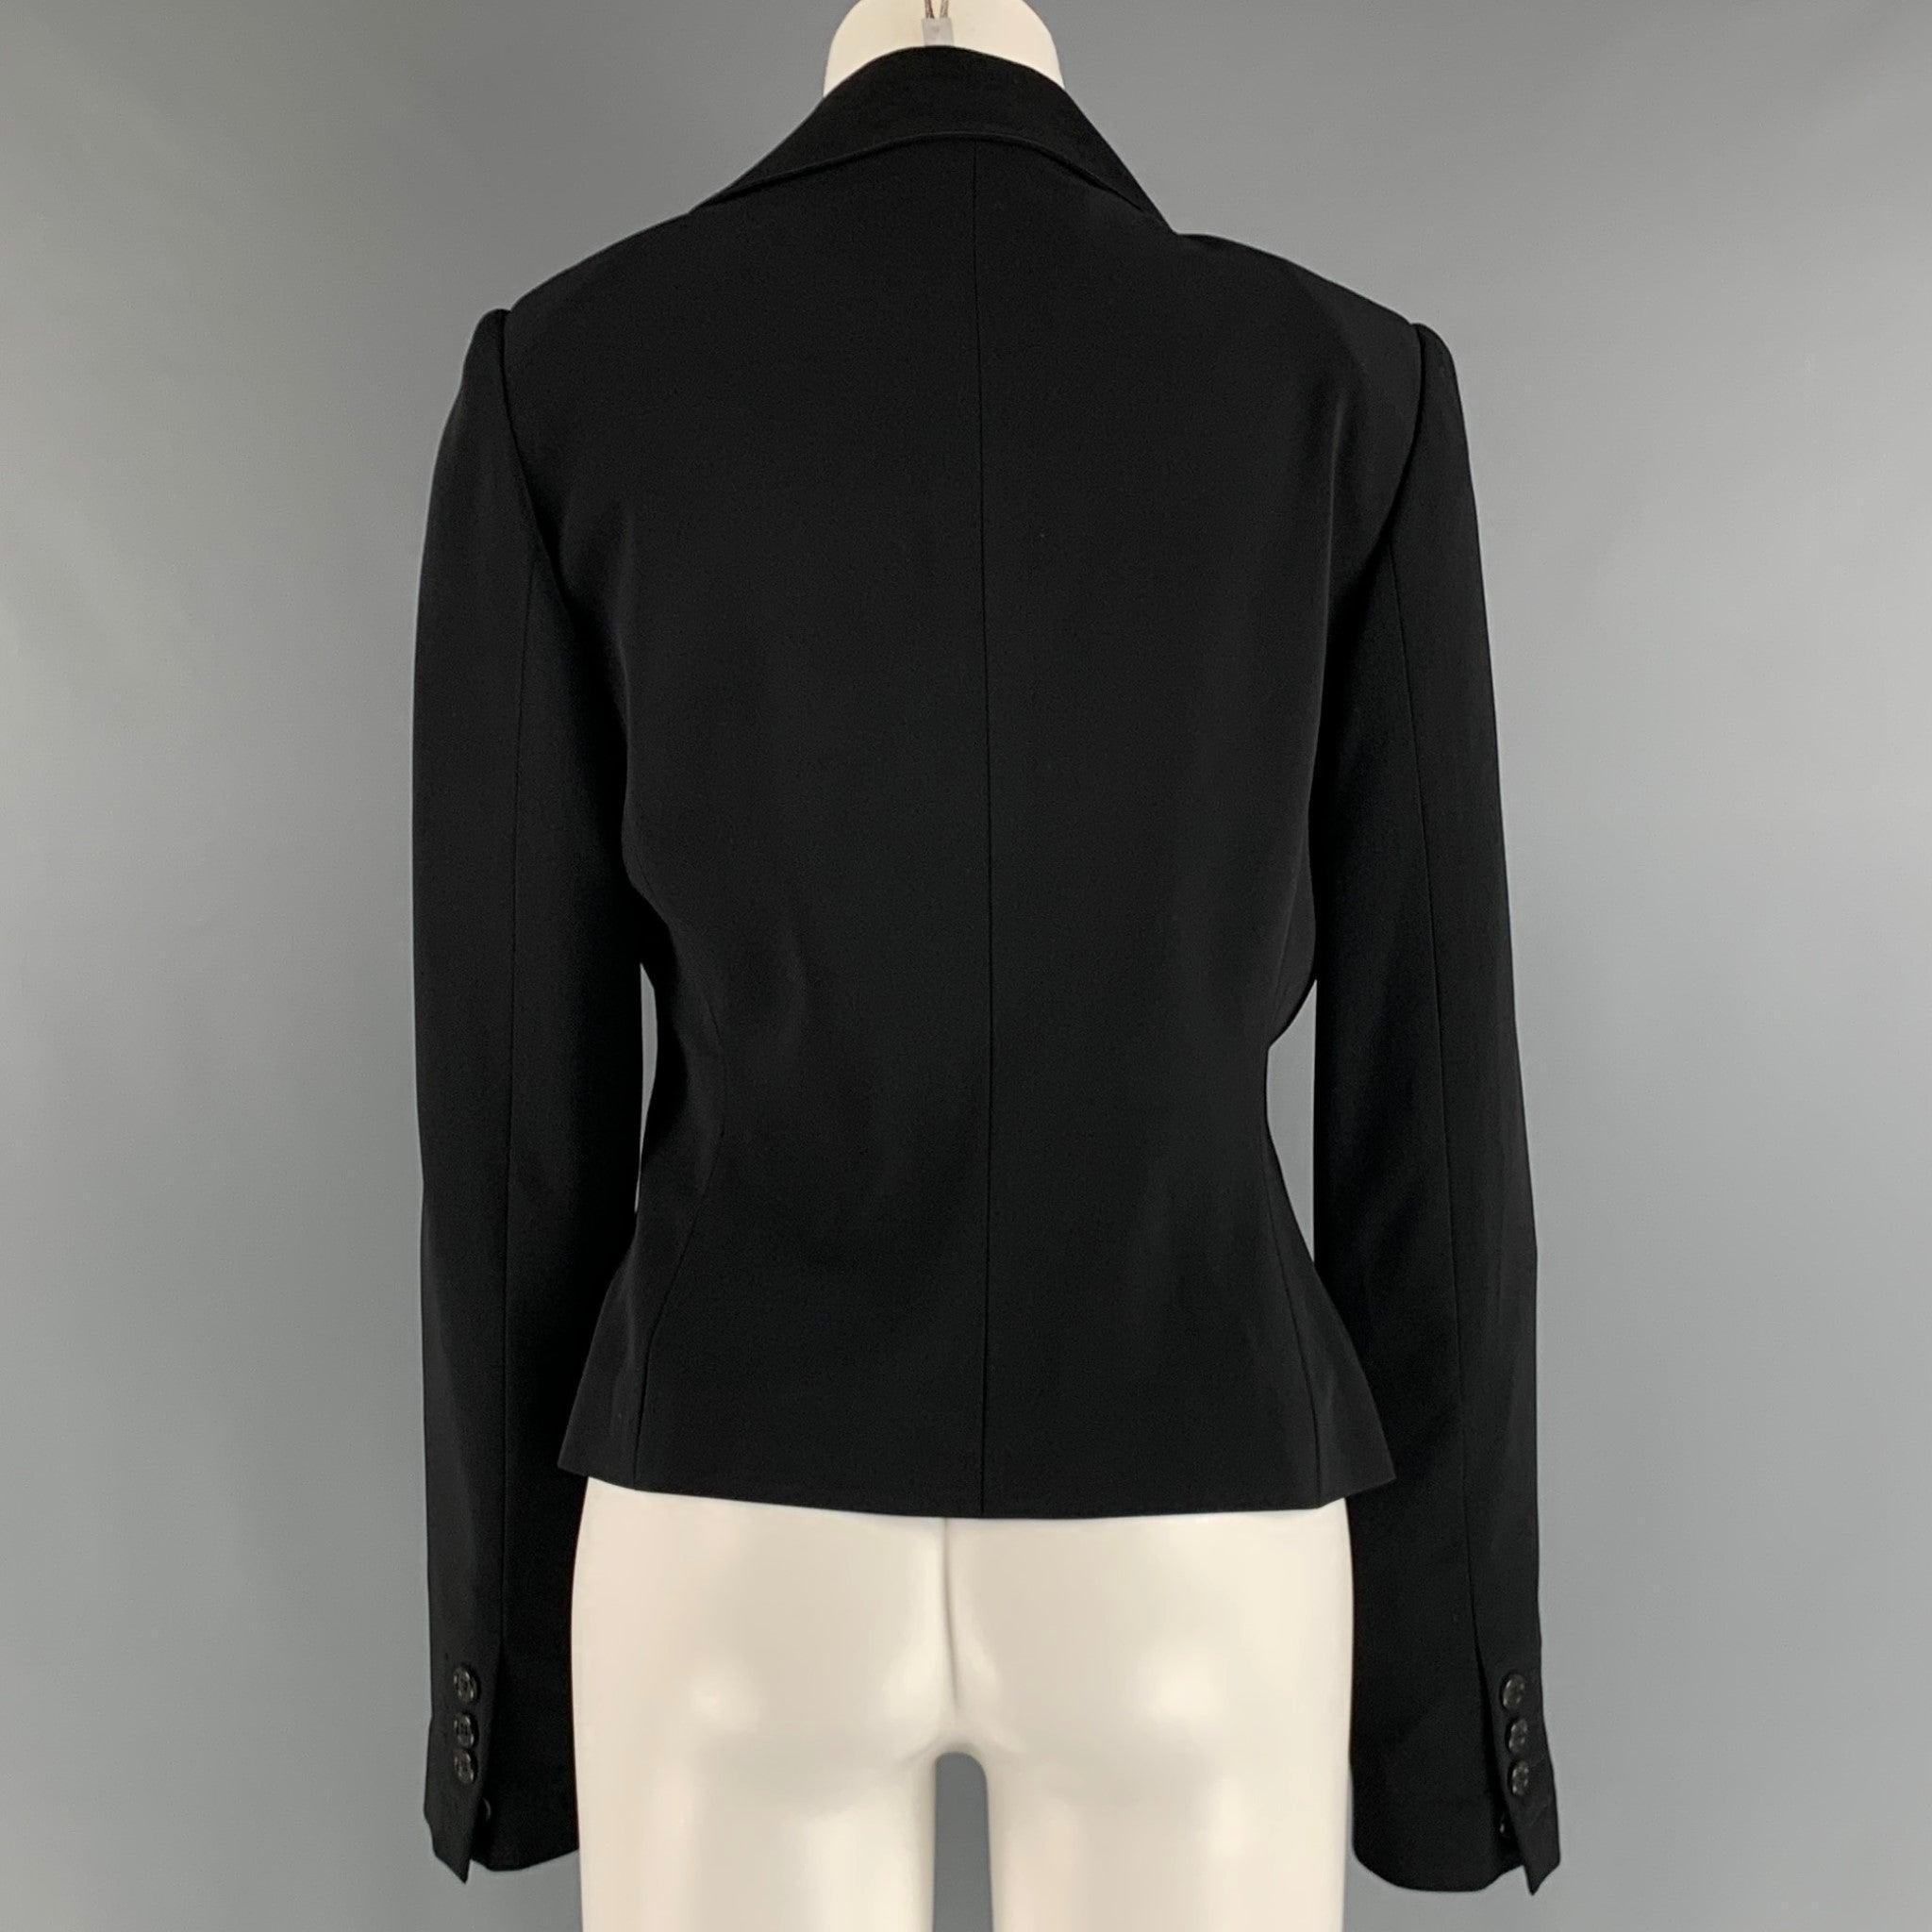 VIKTOR & ROLF Size 8 Polyester Spandex Solid Tuxedo Jacket Blazer In Excellent Condition For Sale In San Francisco, CA